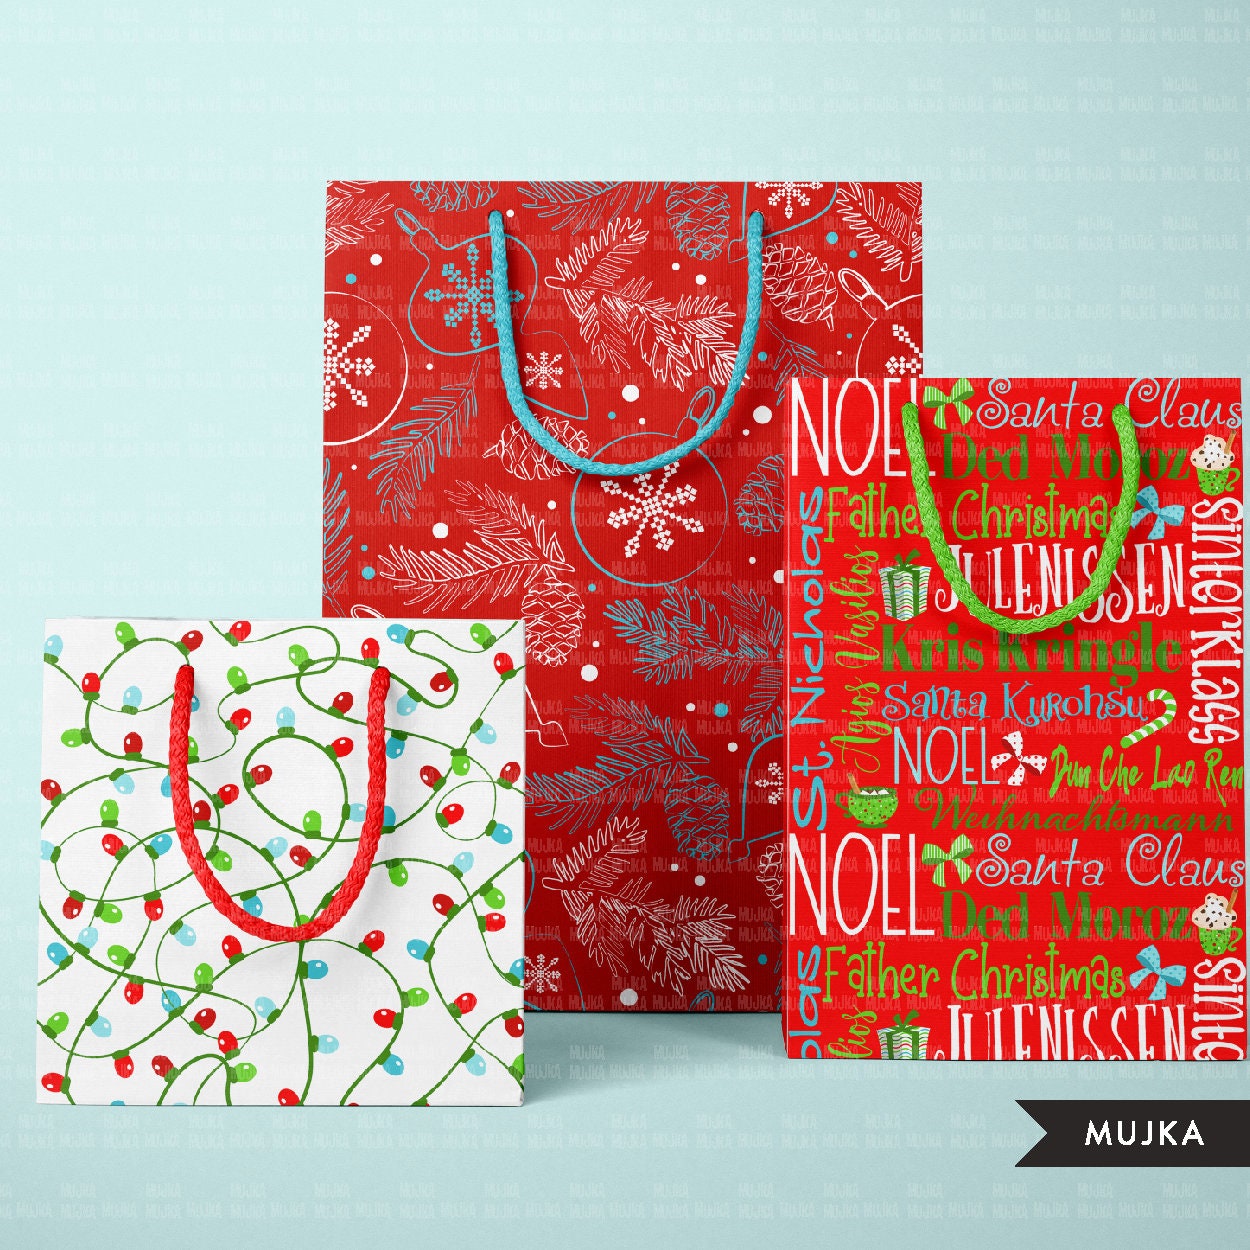 Christmas digital papers, red green blue Christmas papers, Christmas backgrounds, santa digital papers, christmas tree png, cute Christmas